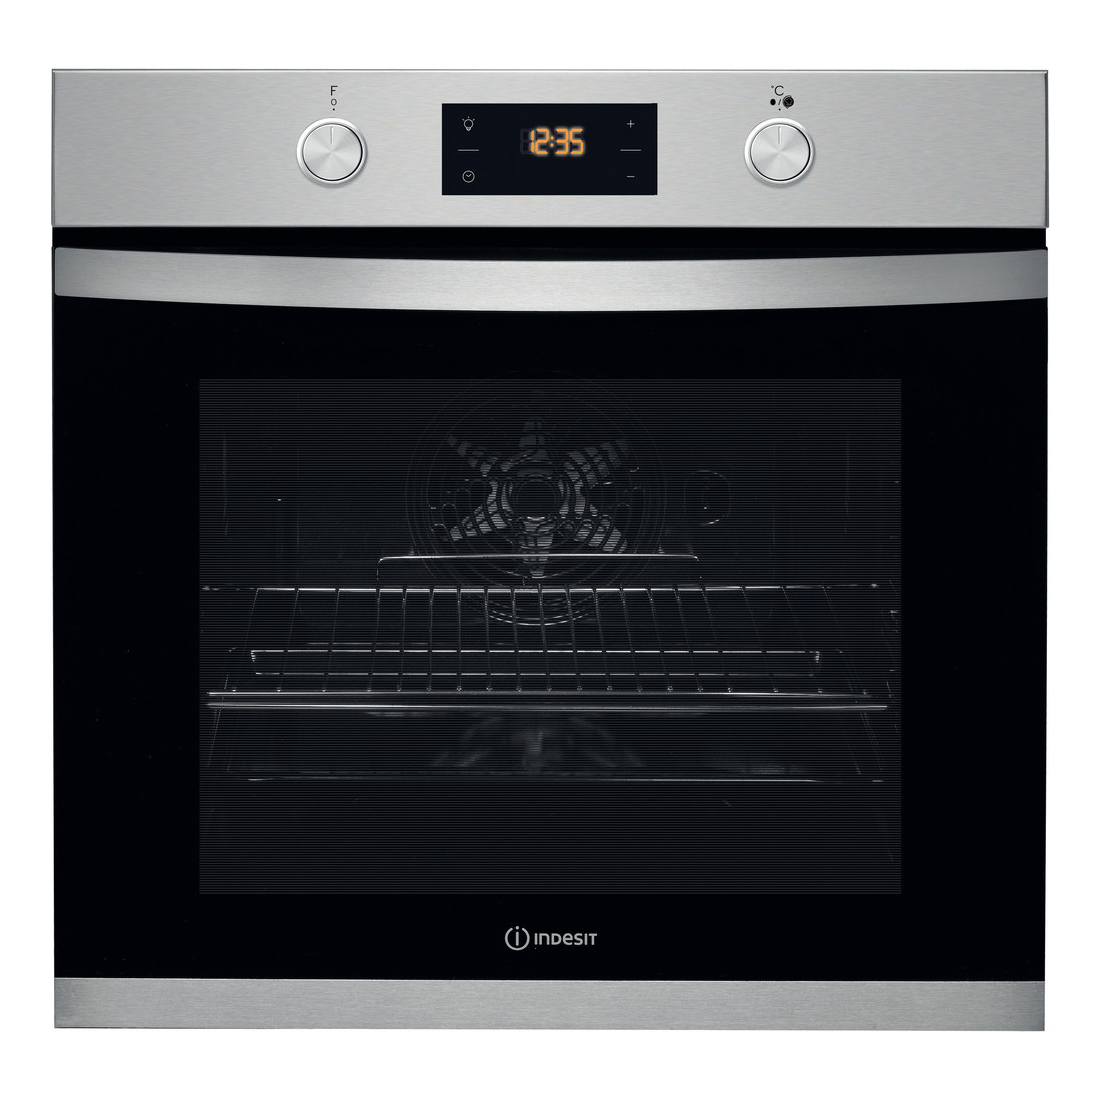 Indesit KFW3841JHIX Built In Electric Single Oven in St Steel 71L A Ra